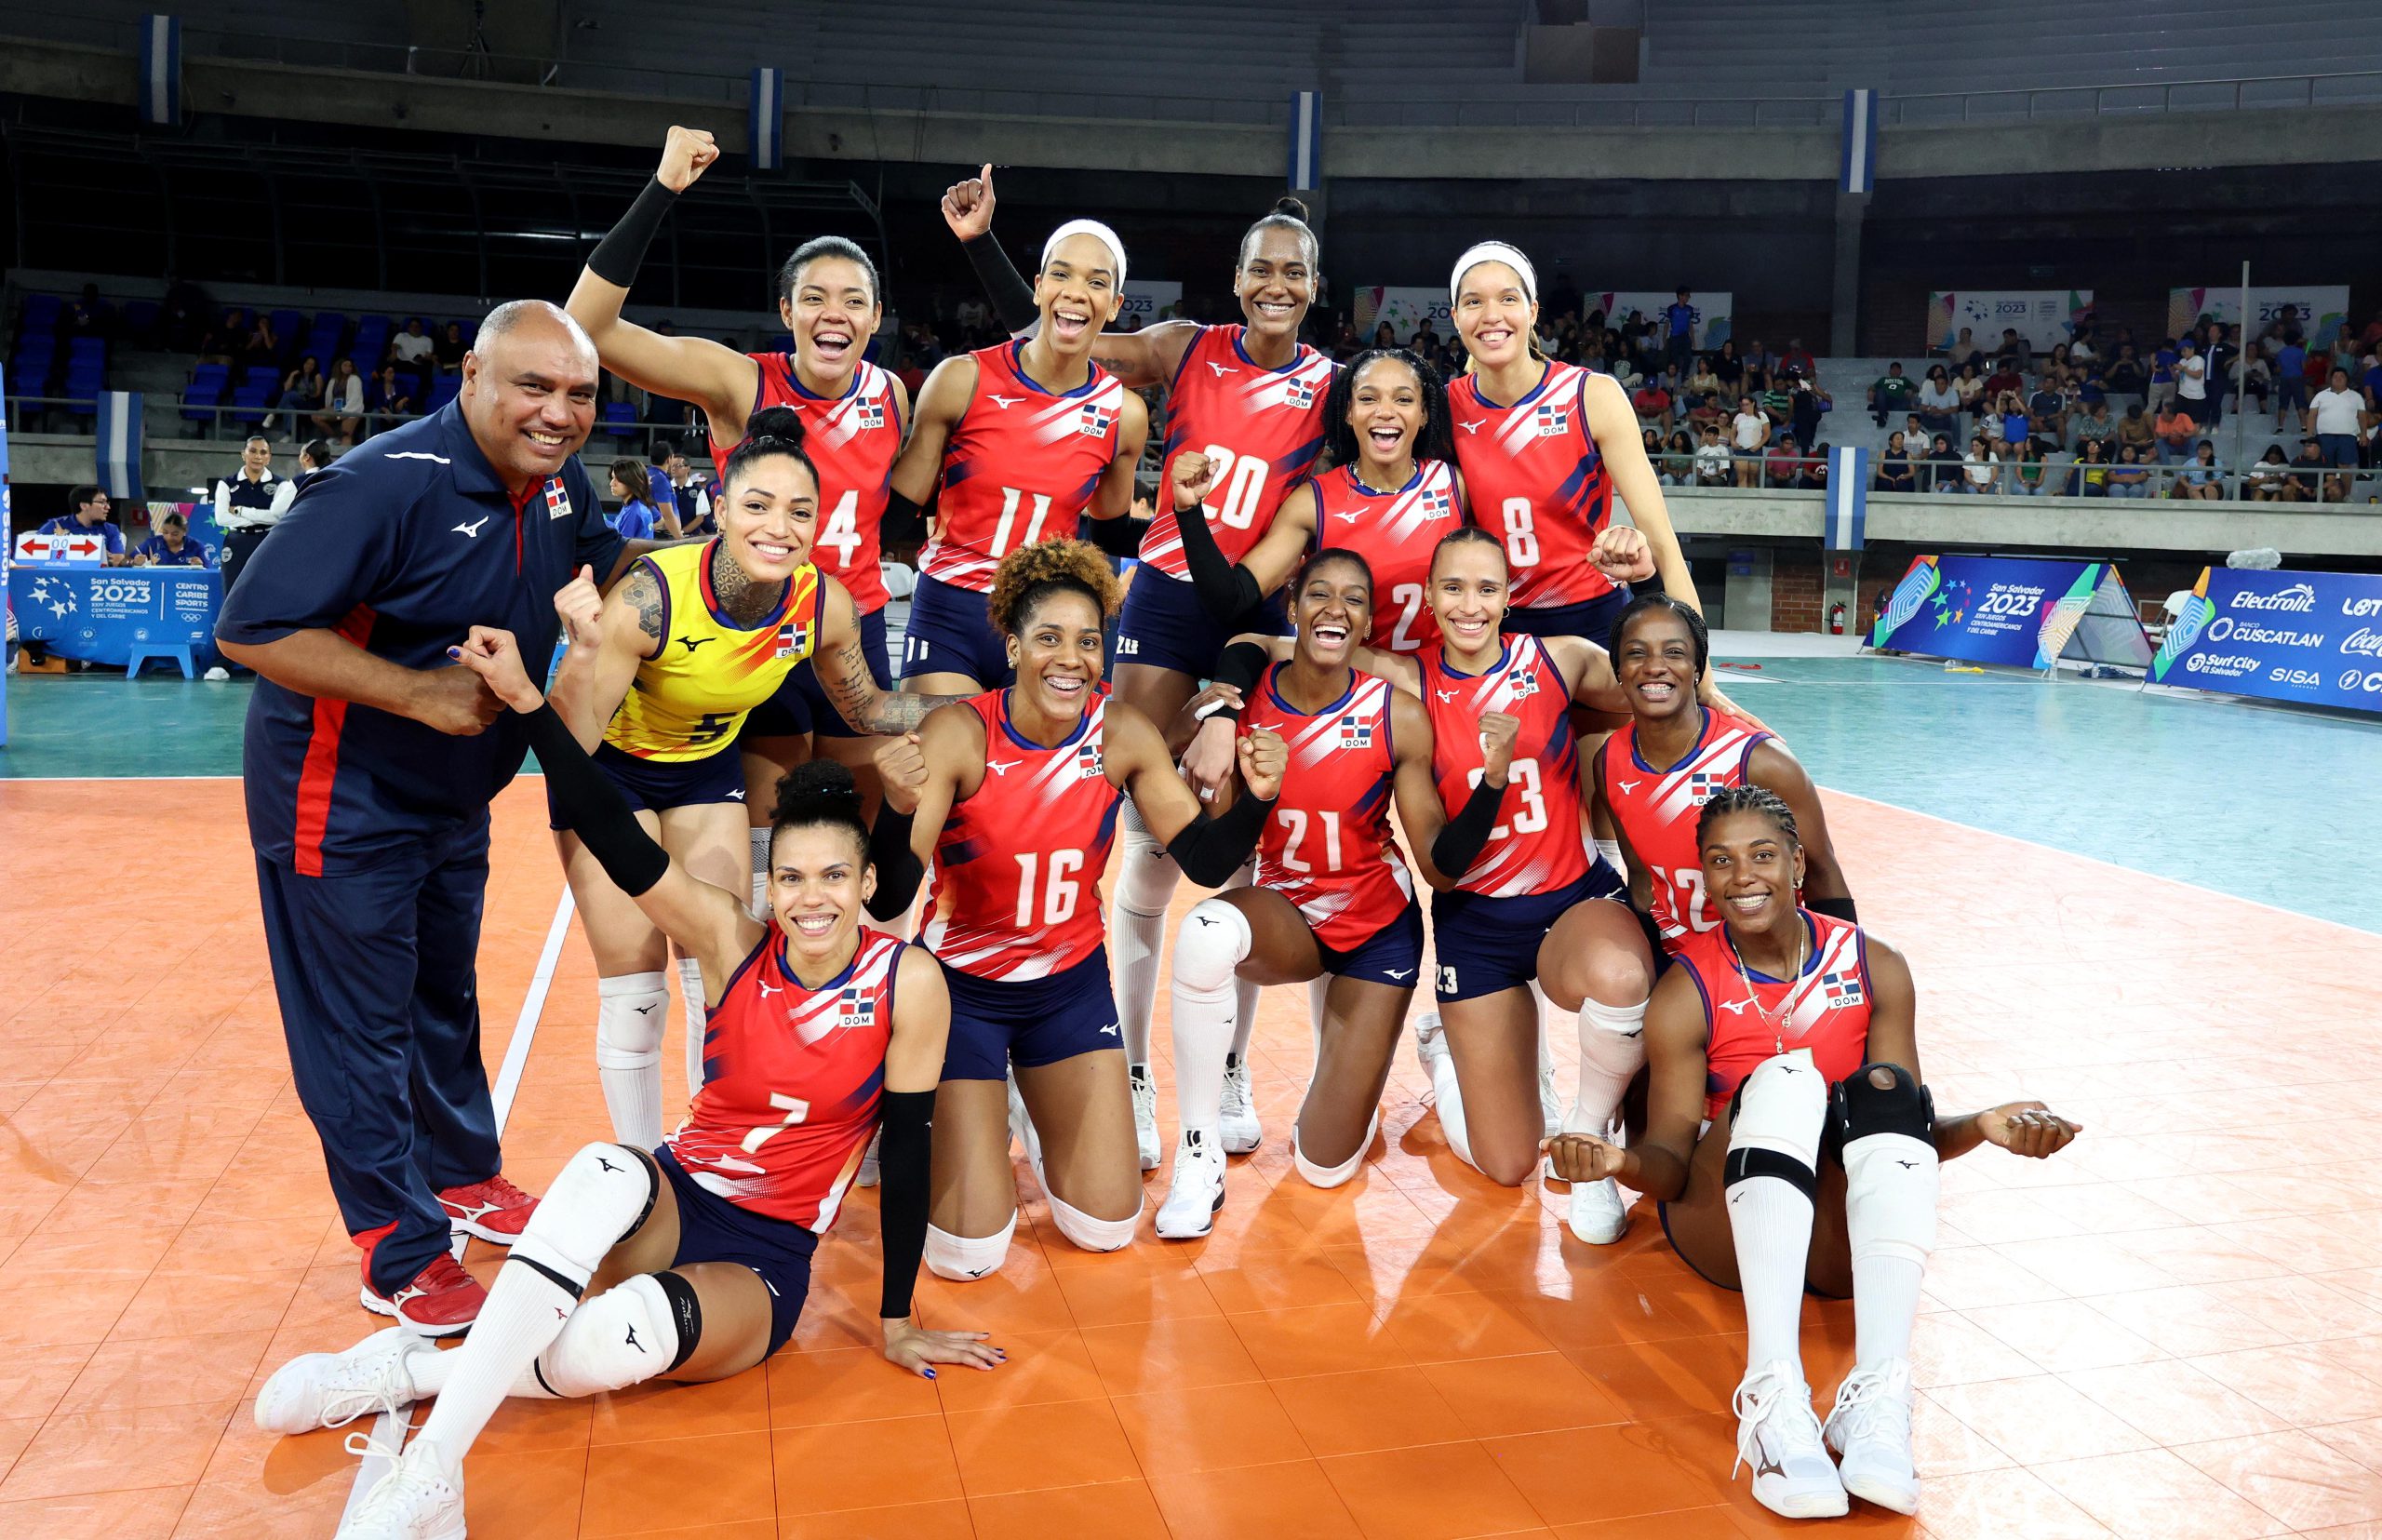 Dominican Republic headed to win eighth CAC Games Gold Medal, sixth in a row